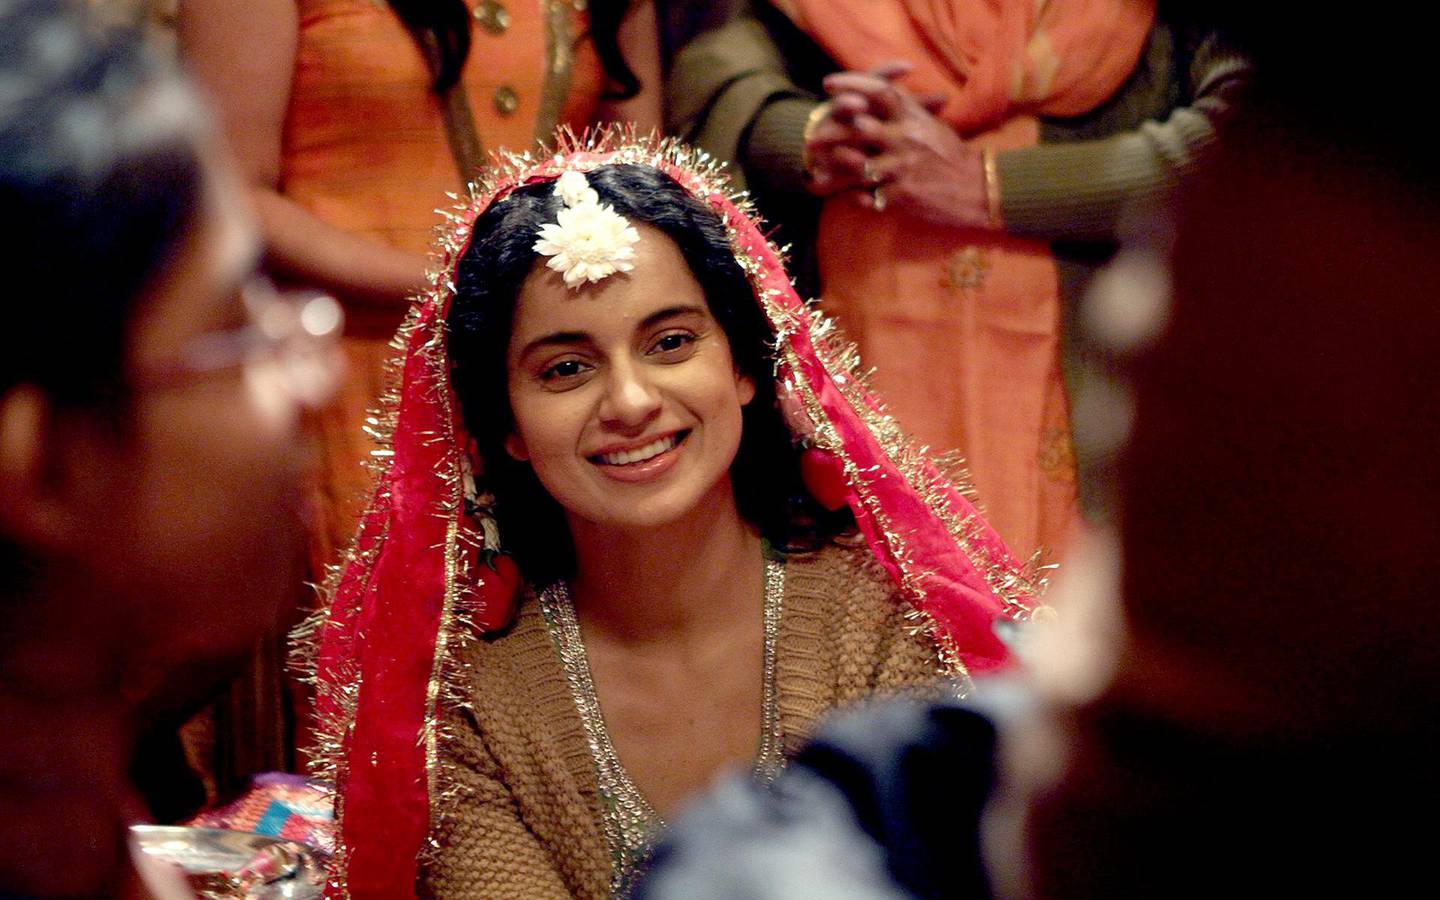 Rani (Kangana Ranaut) is a Delhi girl from a conservative family who is ditched by her fiancÃ© just before her marriage in the movie Queen. Story by Ujala Ali Khan, March 2014. 
CREDIT Courtesy Phantom Productions